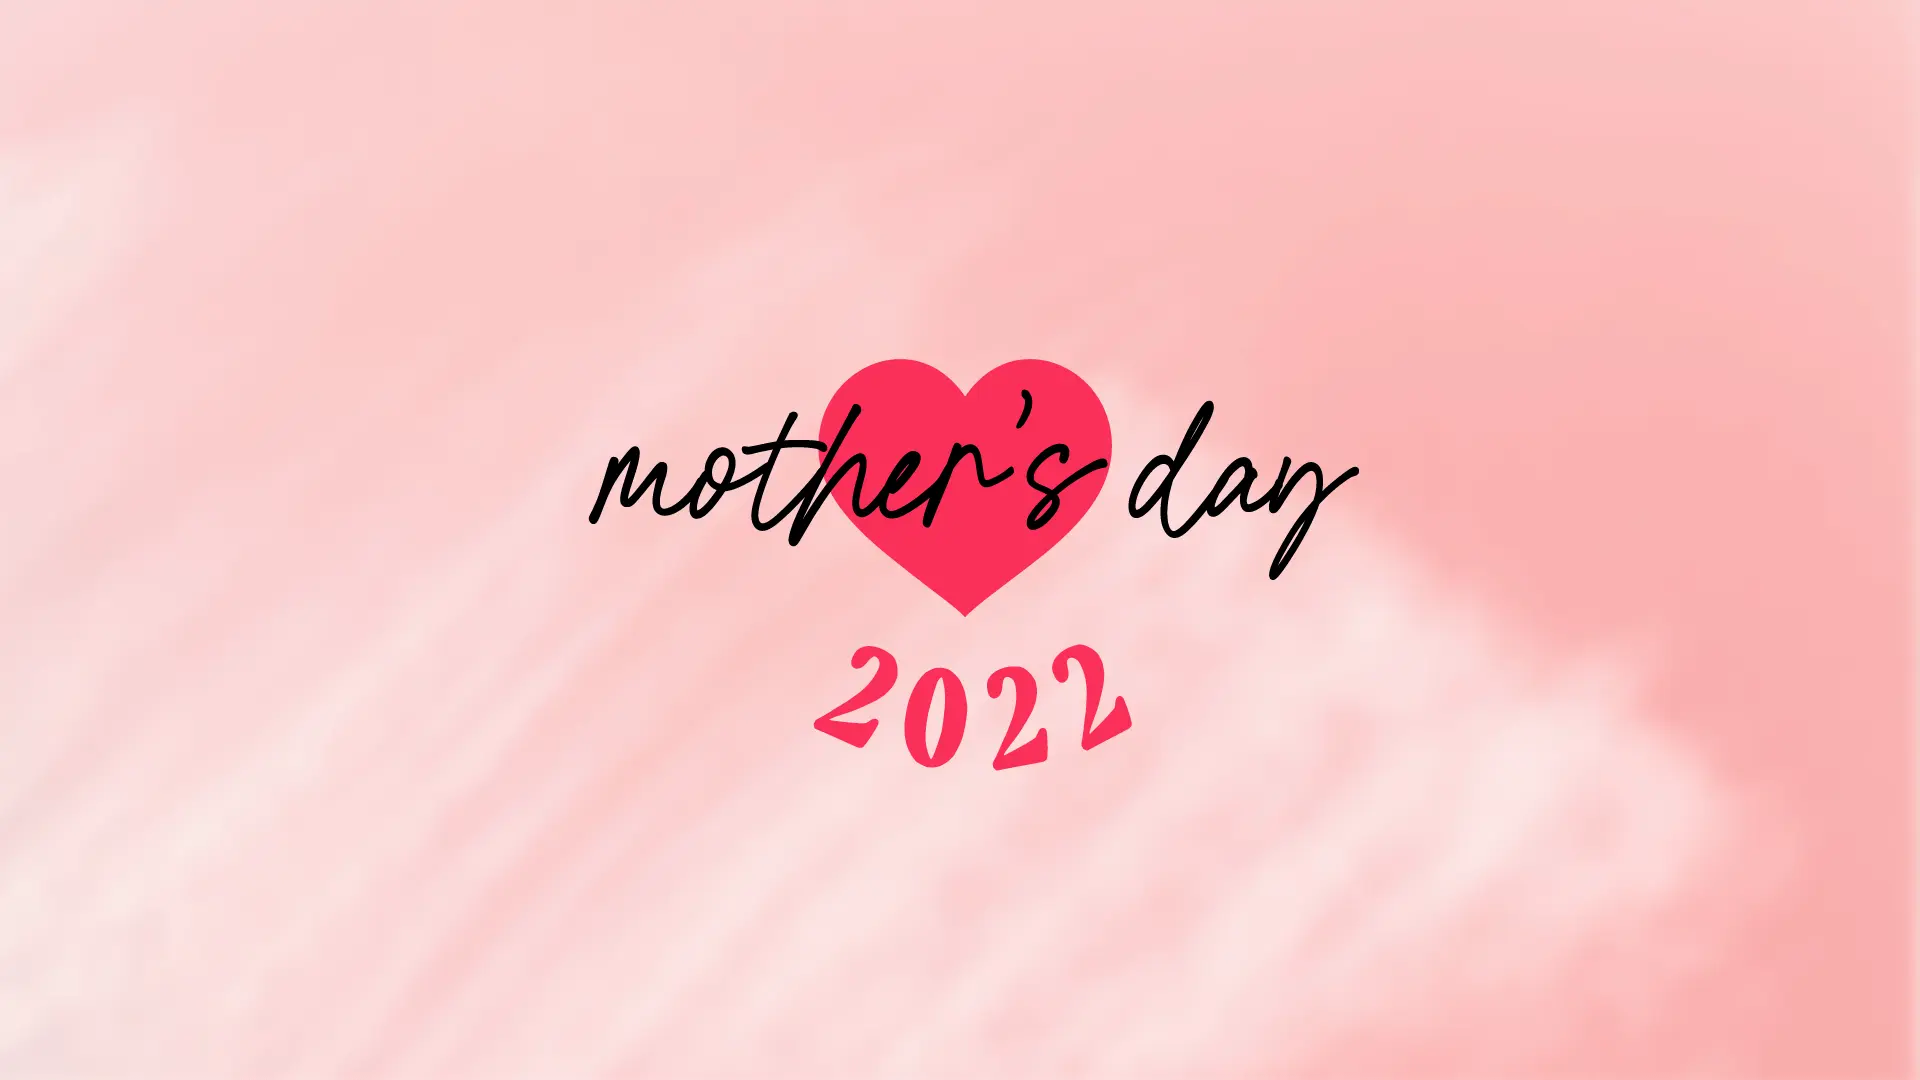 Mother's Day 2022